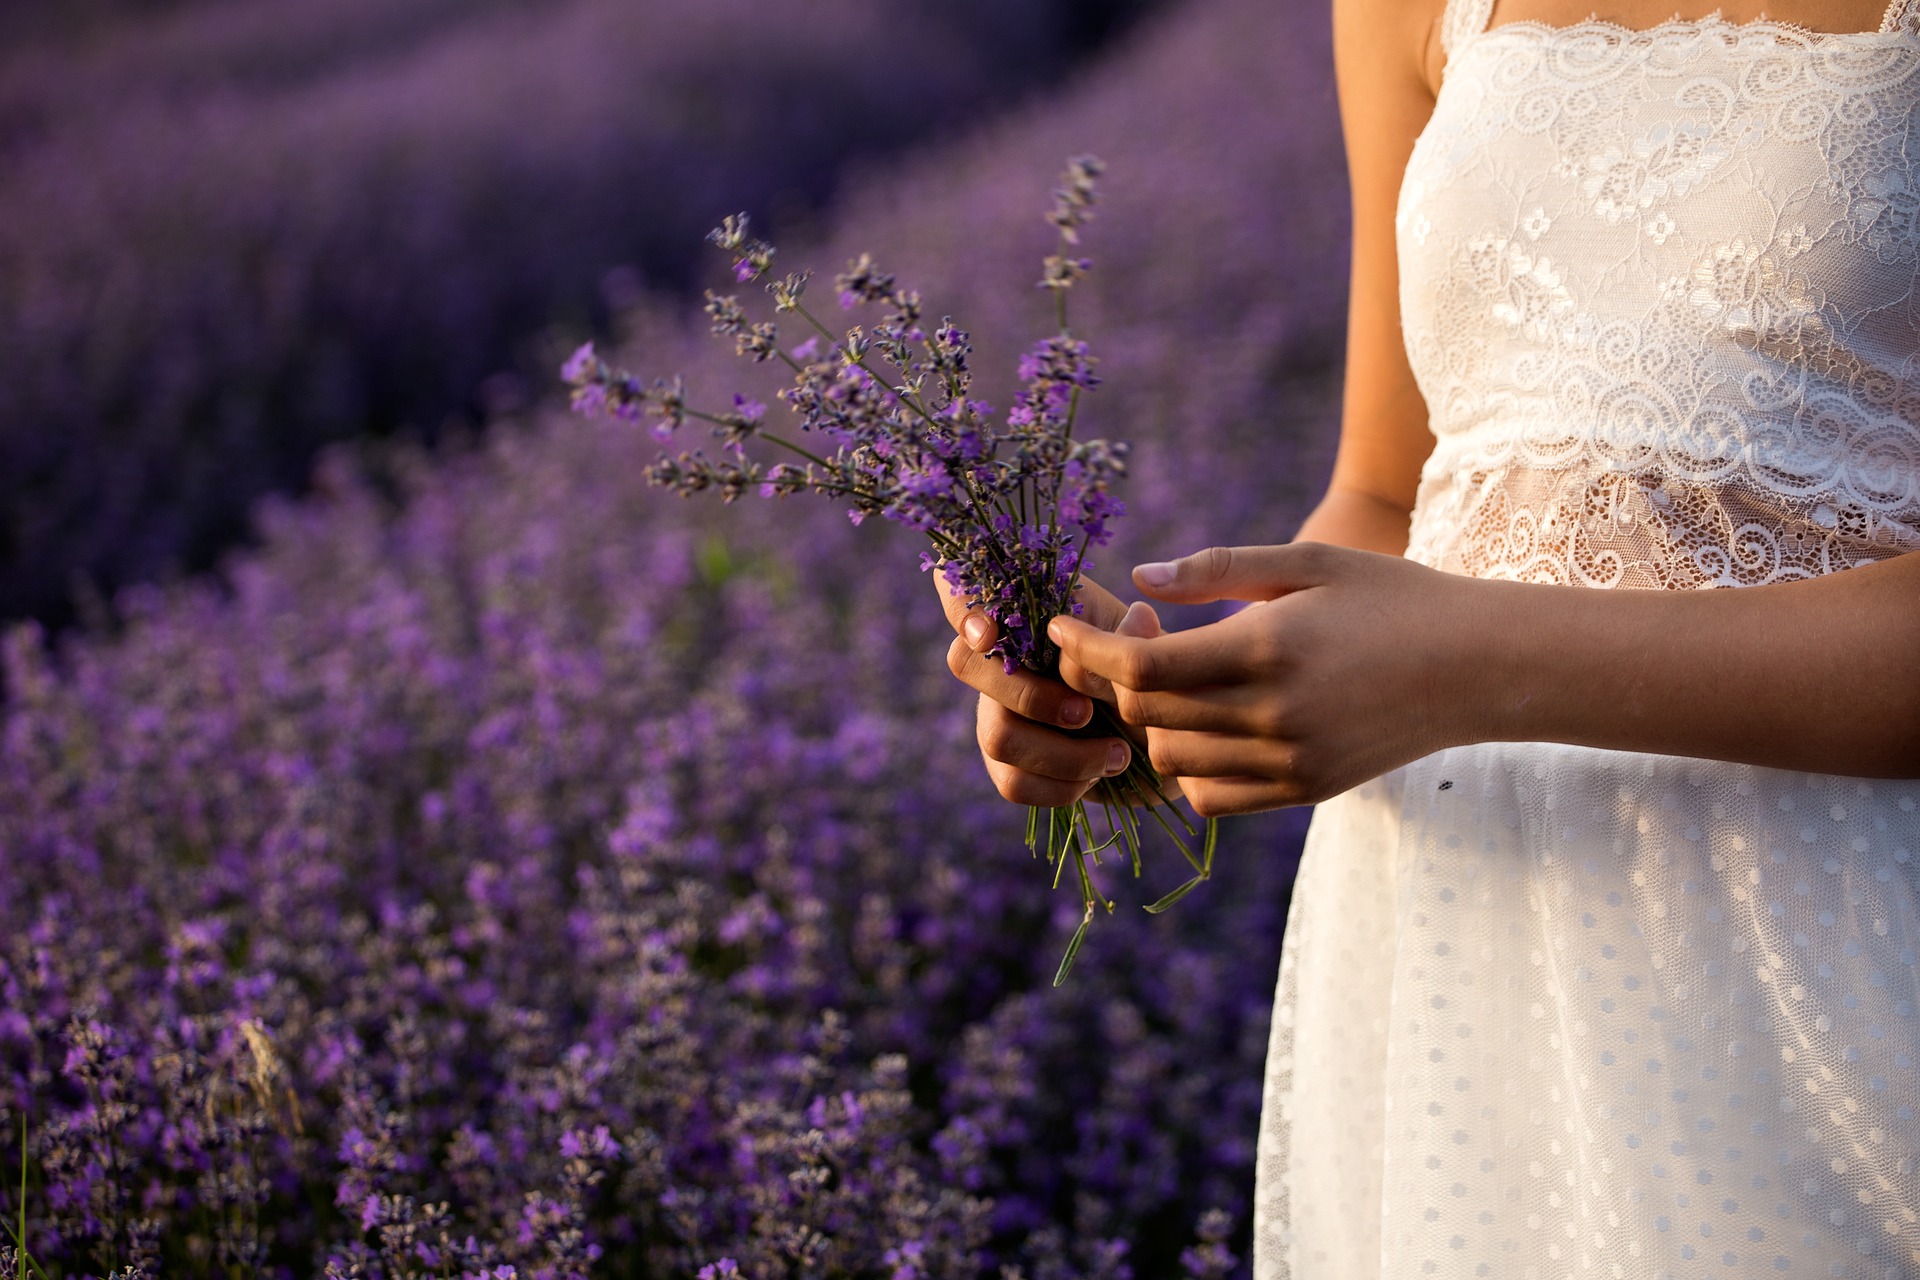 Benefits of lavender for your health